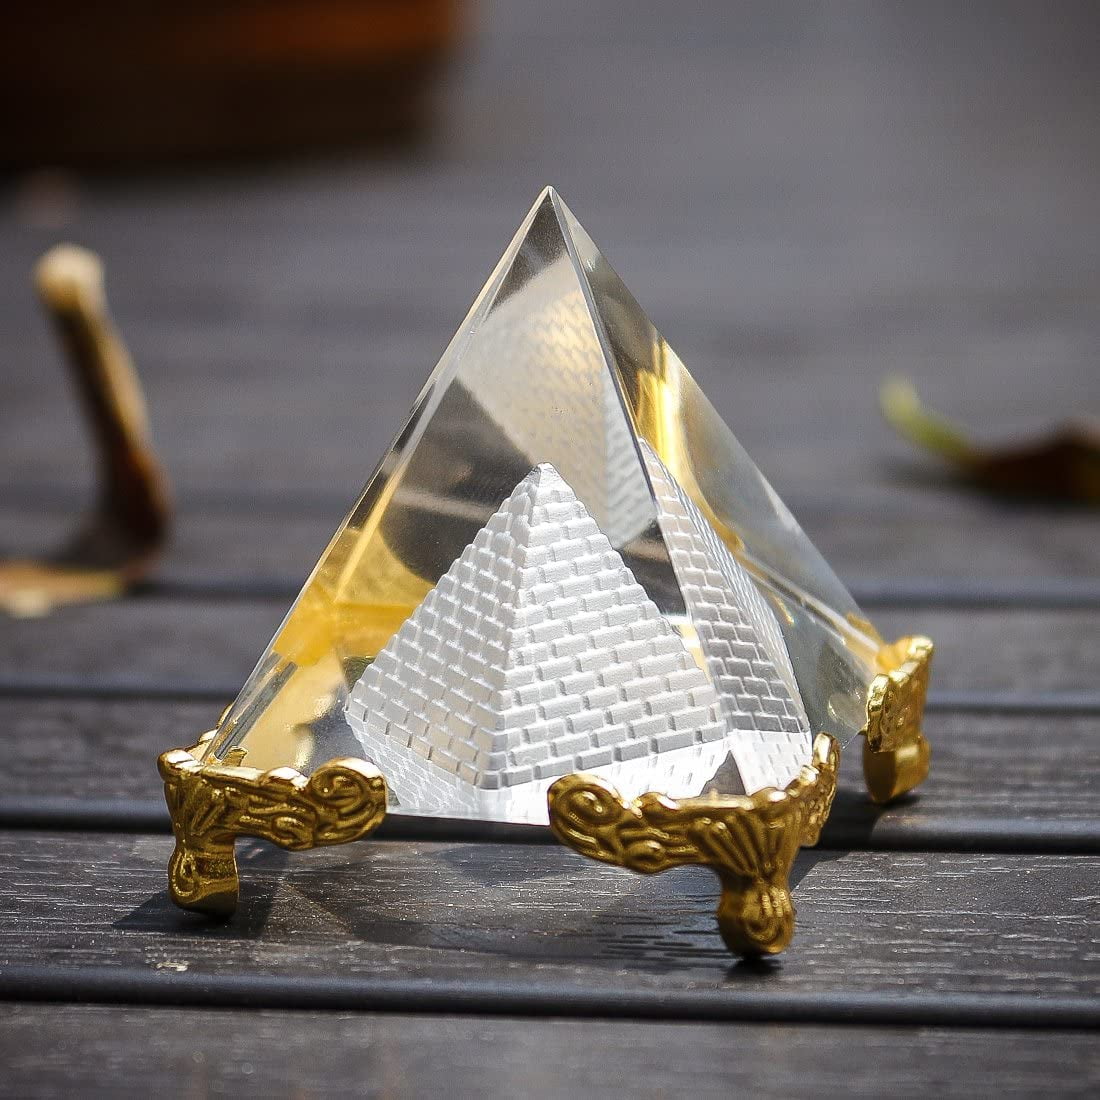 H&D 2.4 Clear Crystal Pyramid Paperweight Pyramid Figurine with Gift Box 